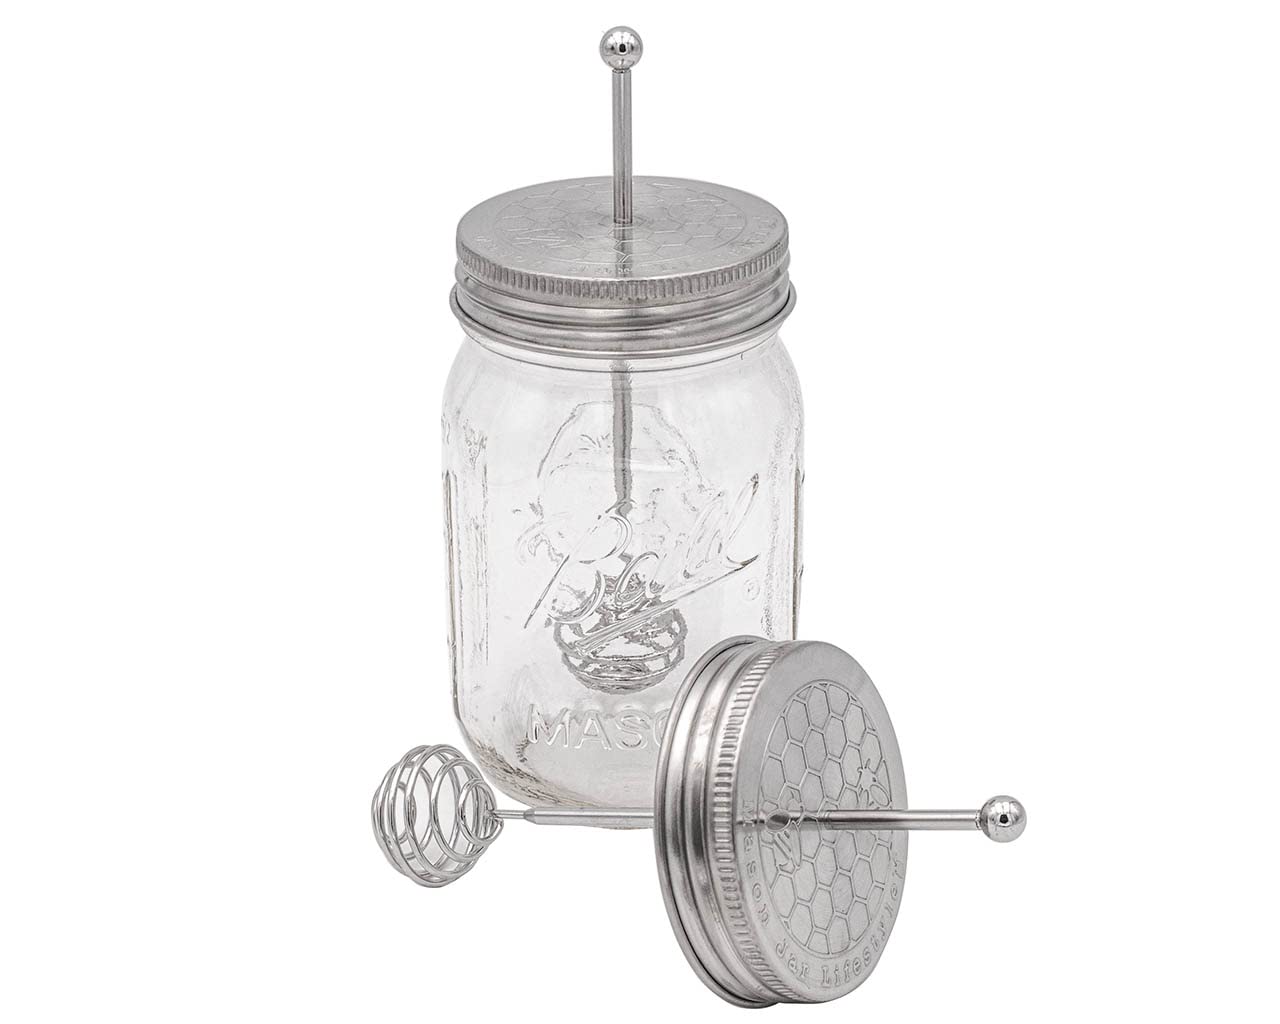 Stainless Steel Honey Dipper by Mason Jar Lifestyle (Regular Mouth)